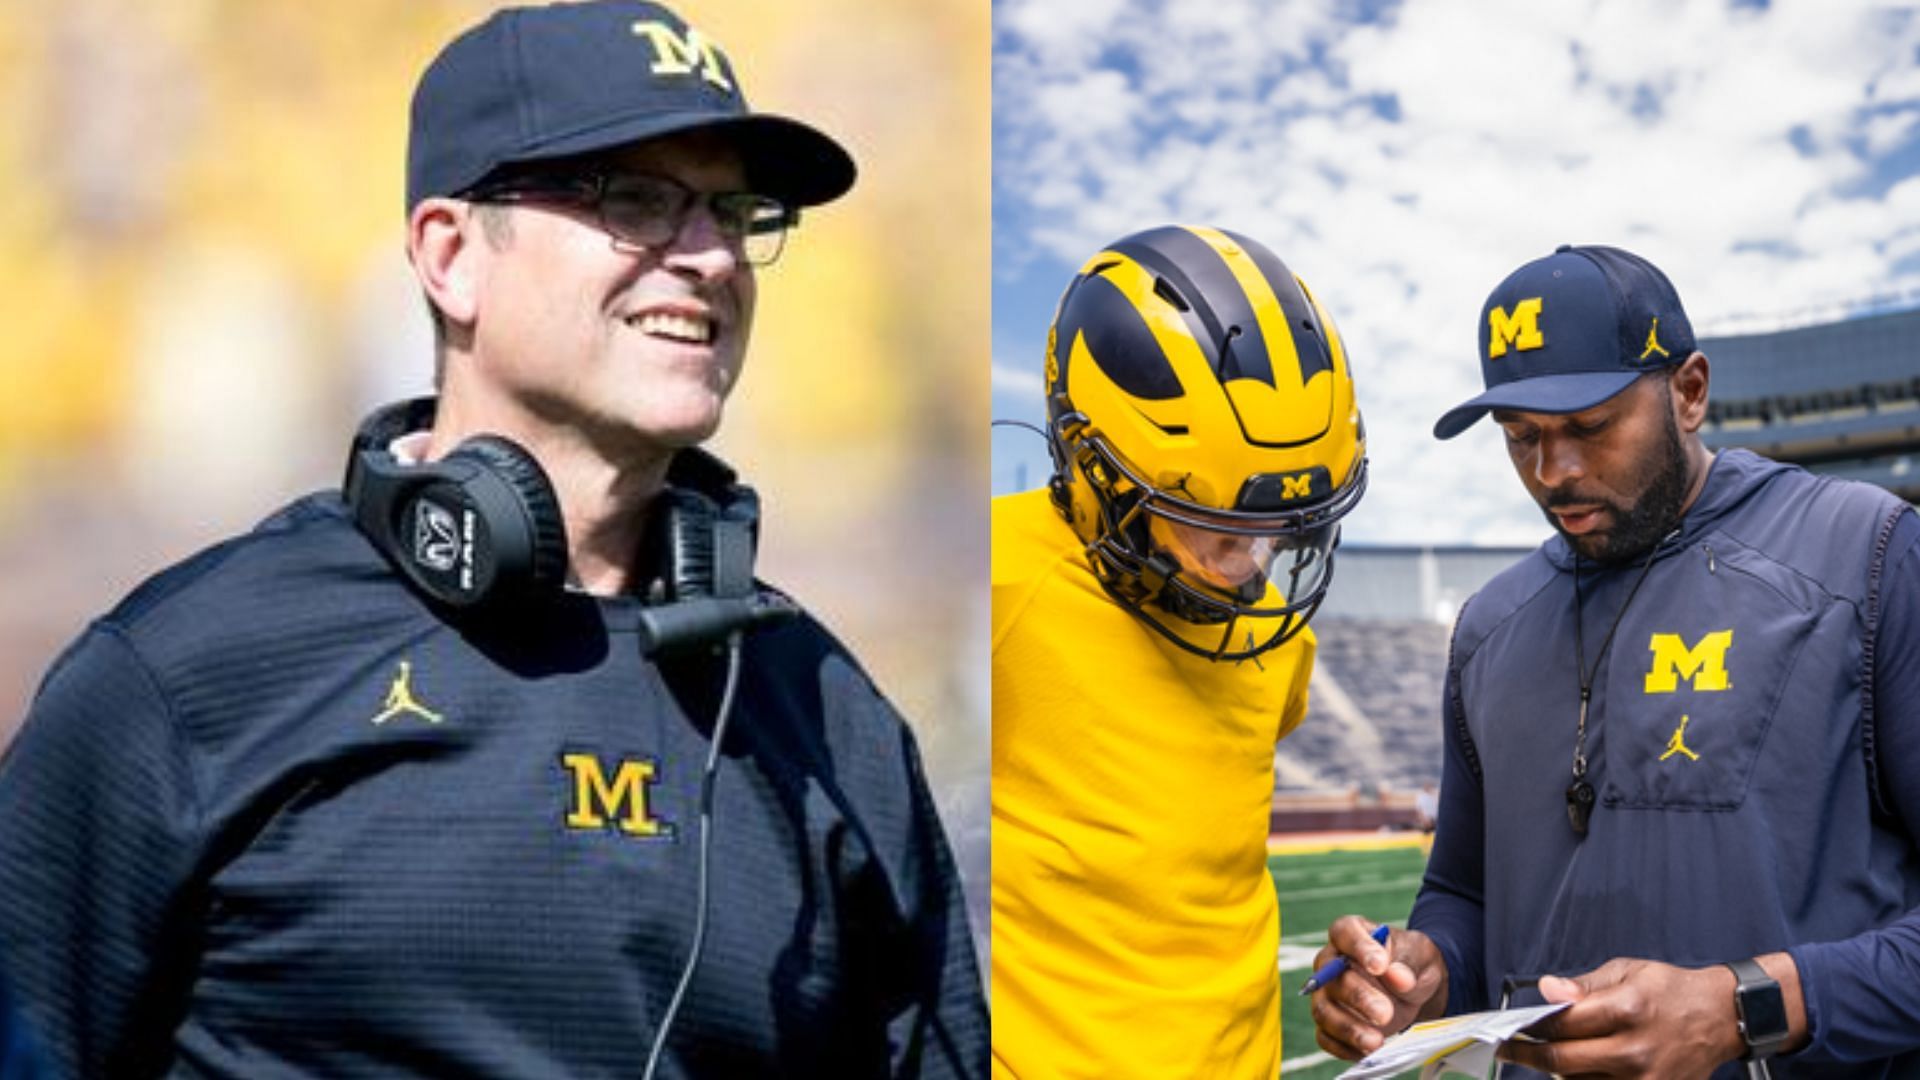 Michigan gets some of their punishments from NCAA violations